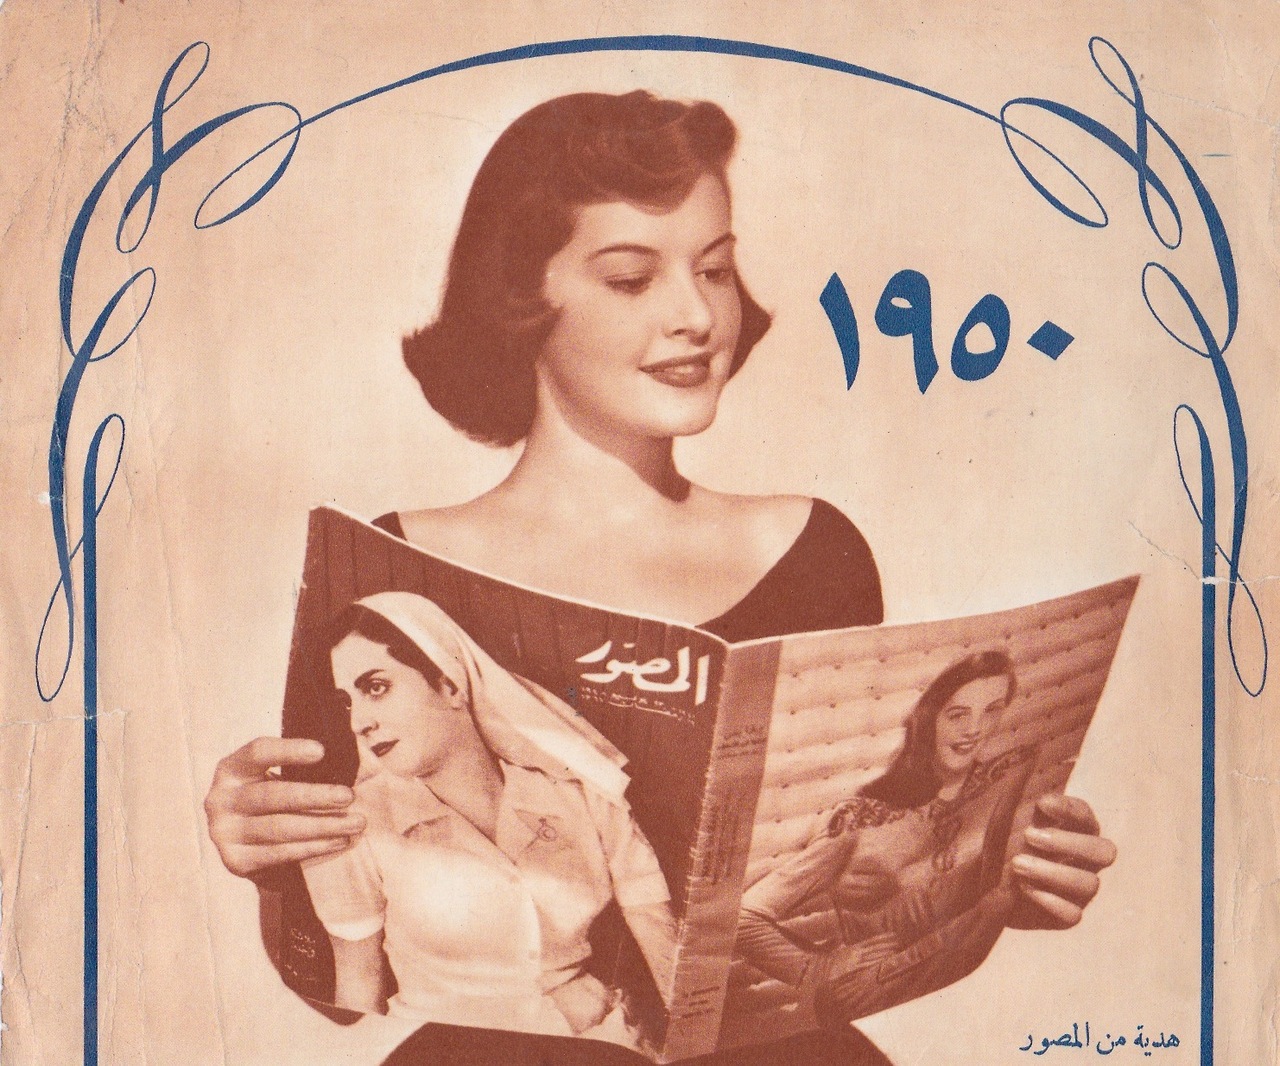 A woman reading a magazine in the 1950s